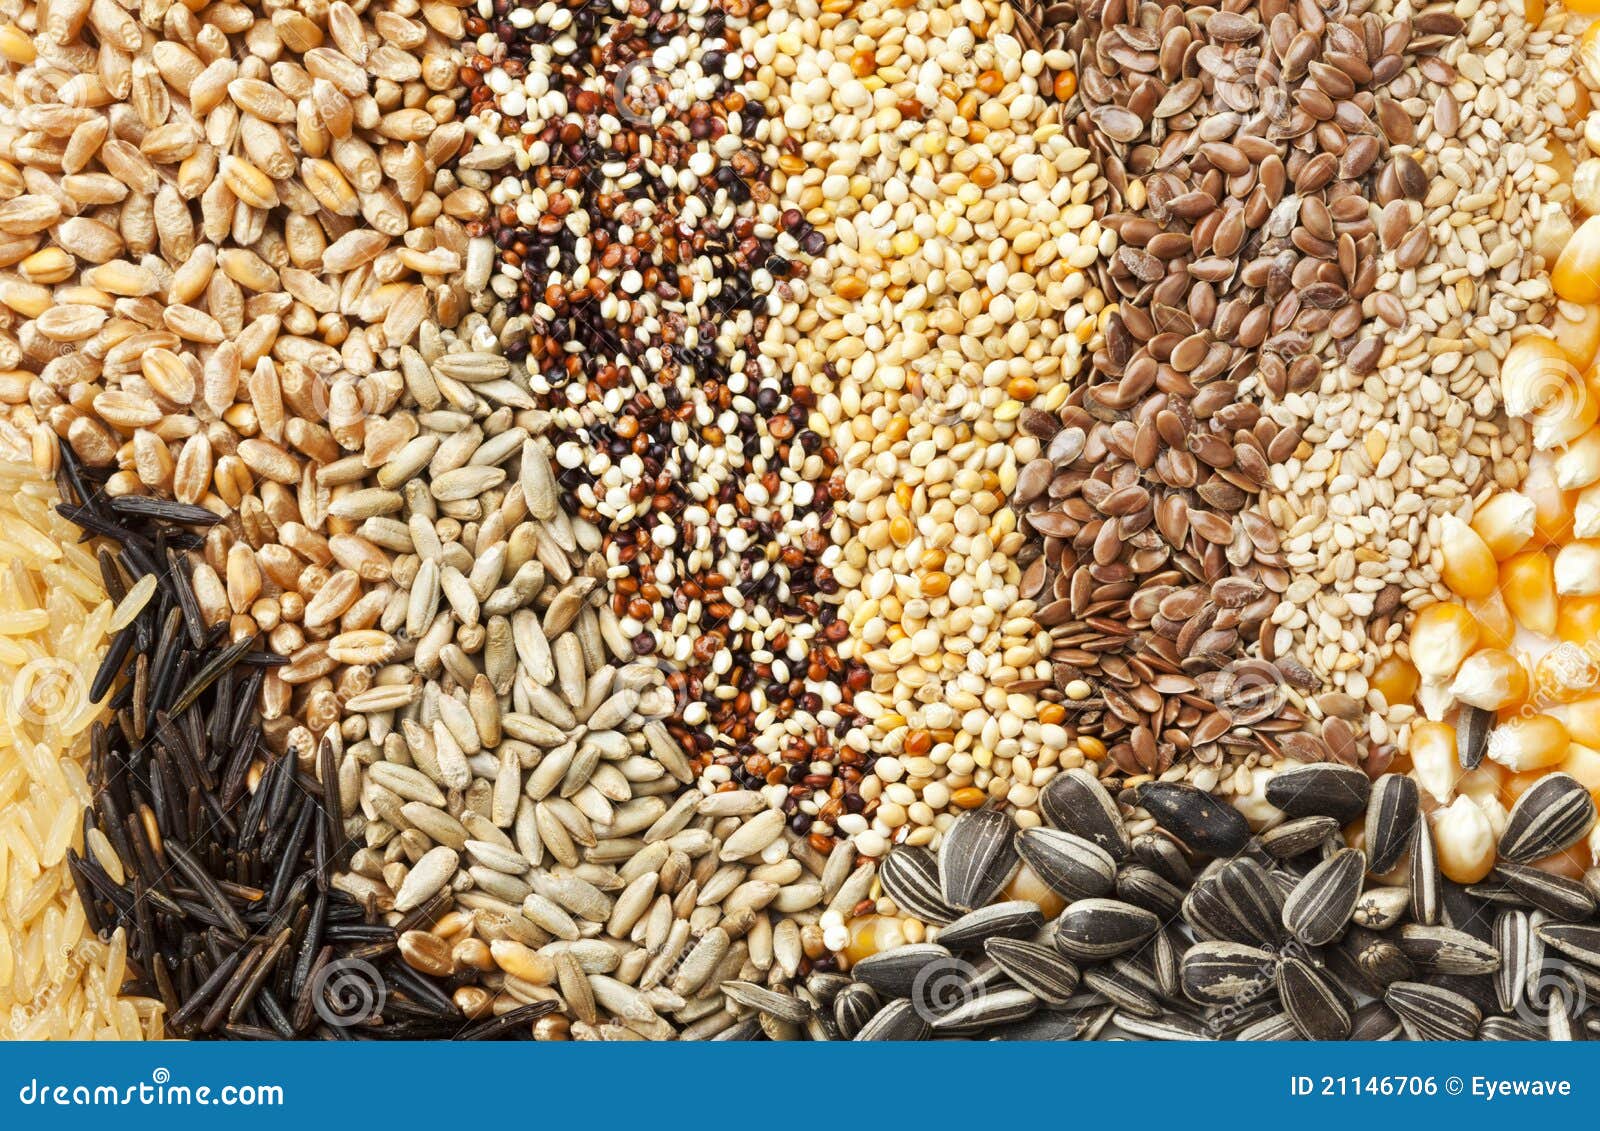 Assorted Grains And Seeds Background Royalty Free Stock Image - Image